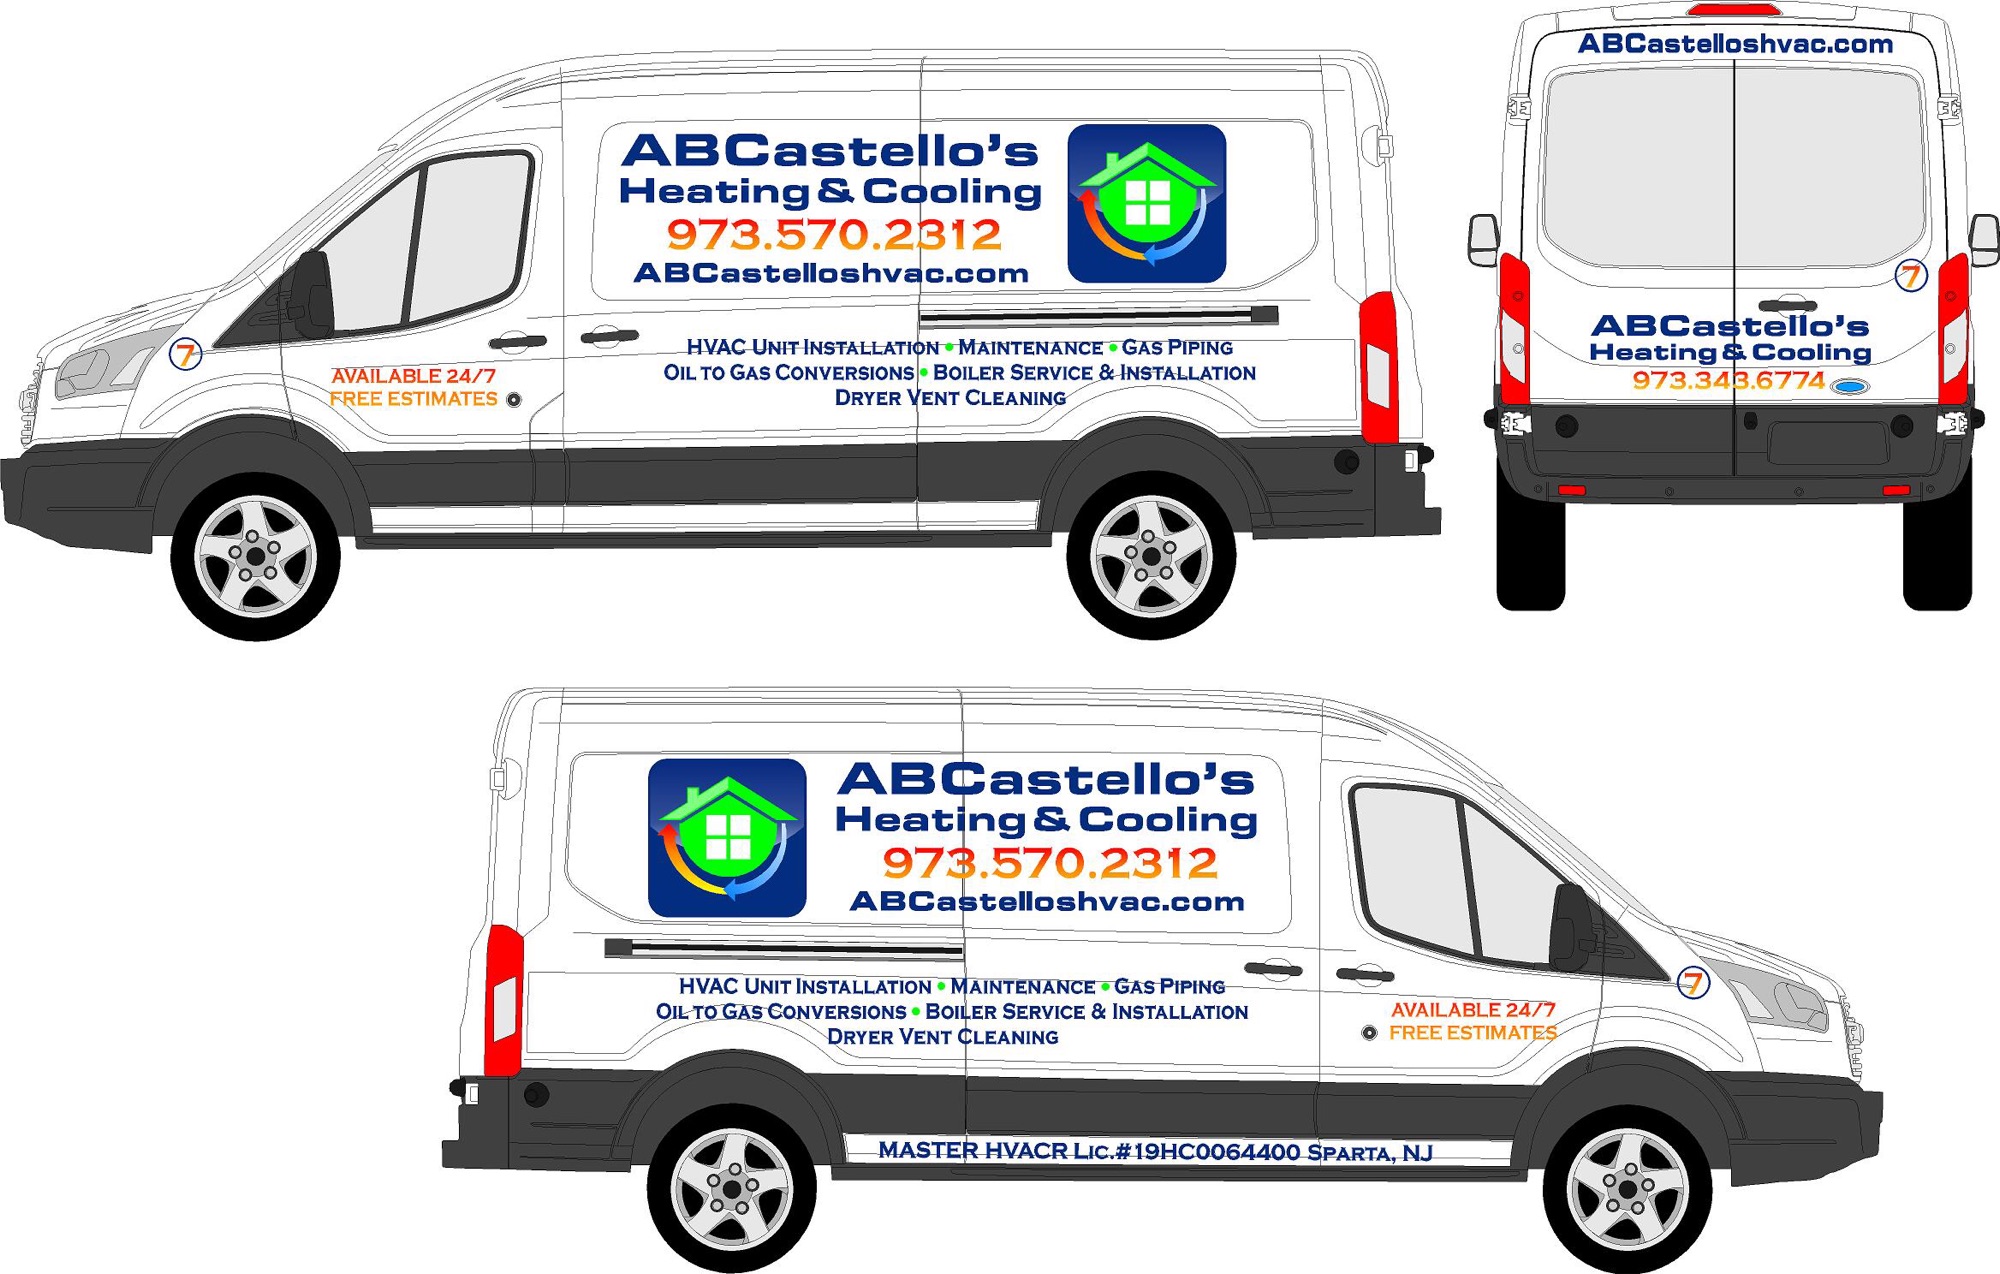 ABCastello's Heating and Cooling Logo